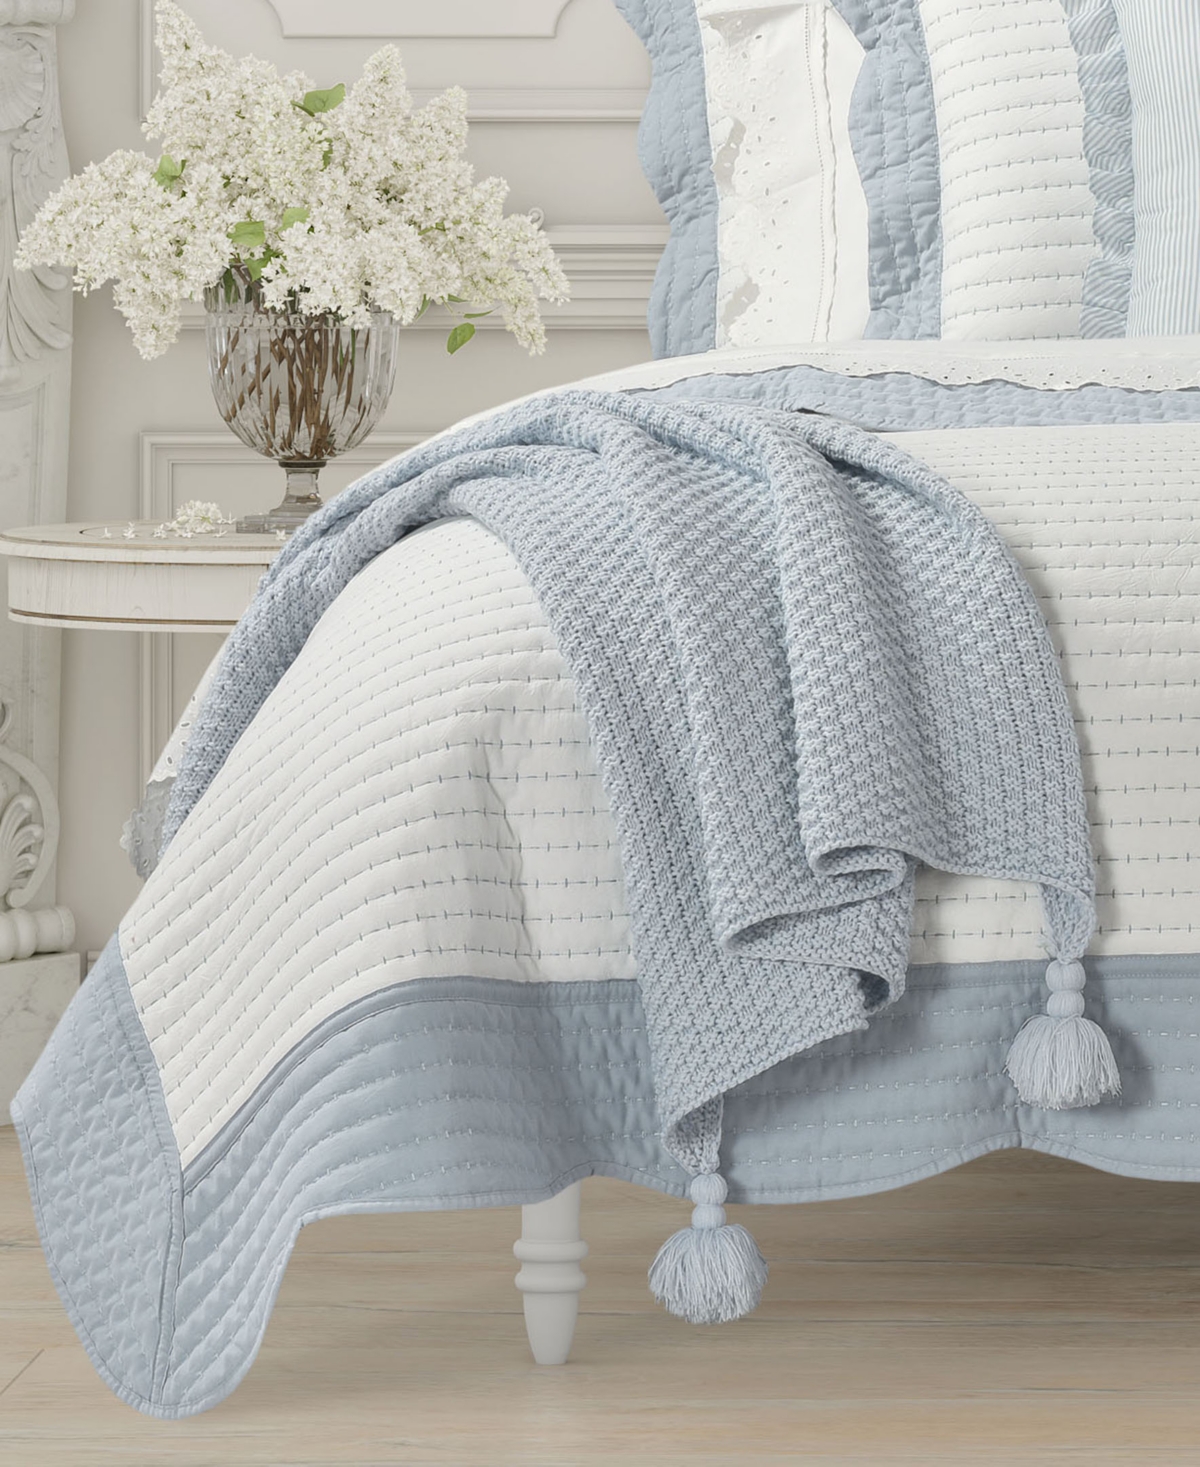 Piper & Wright Millie Throw Bedding In Blue